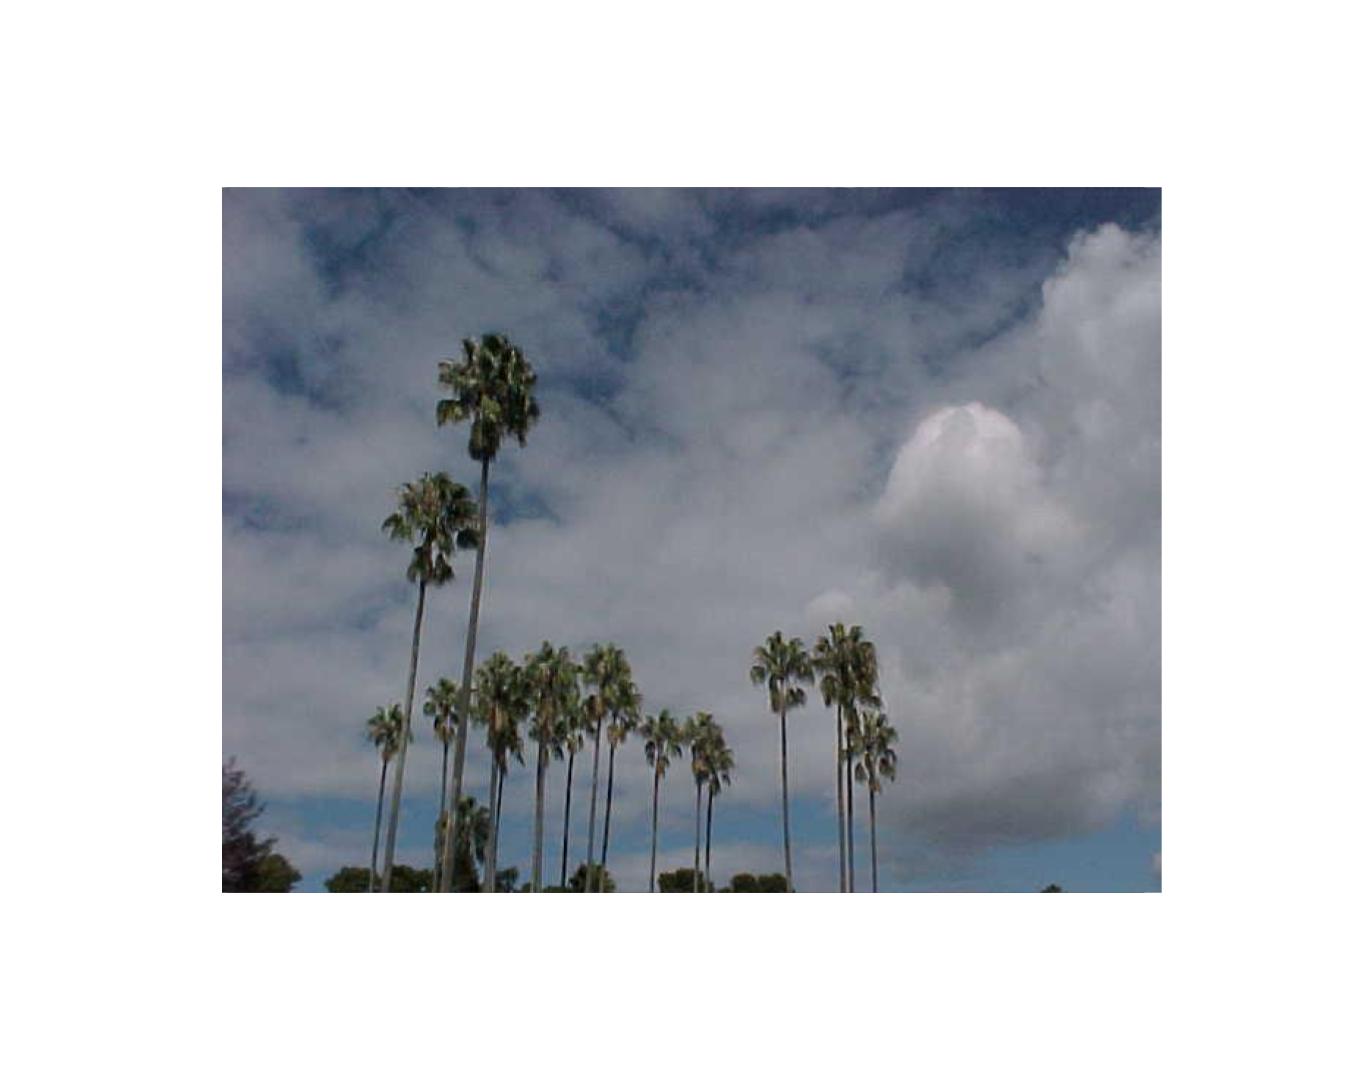 Photograph of palm trees against a cloudy blue sky.